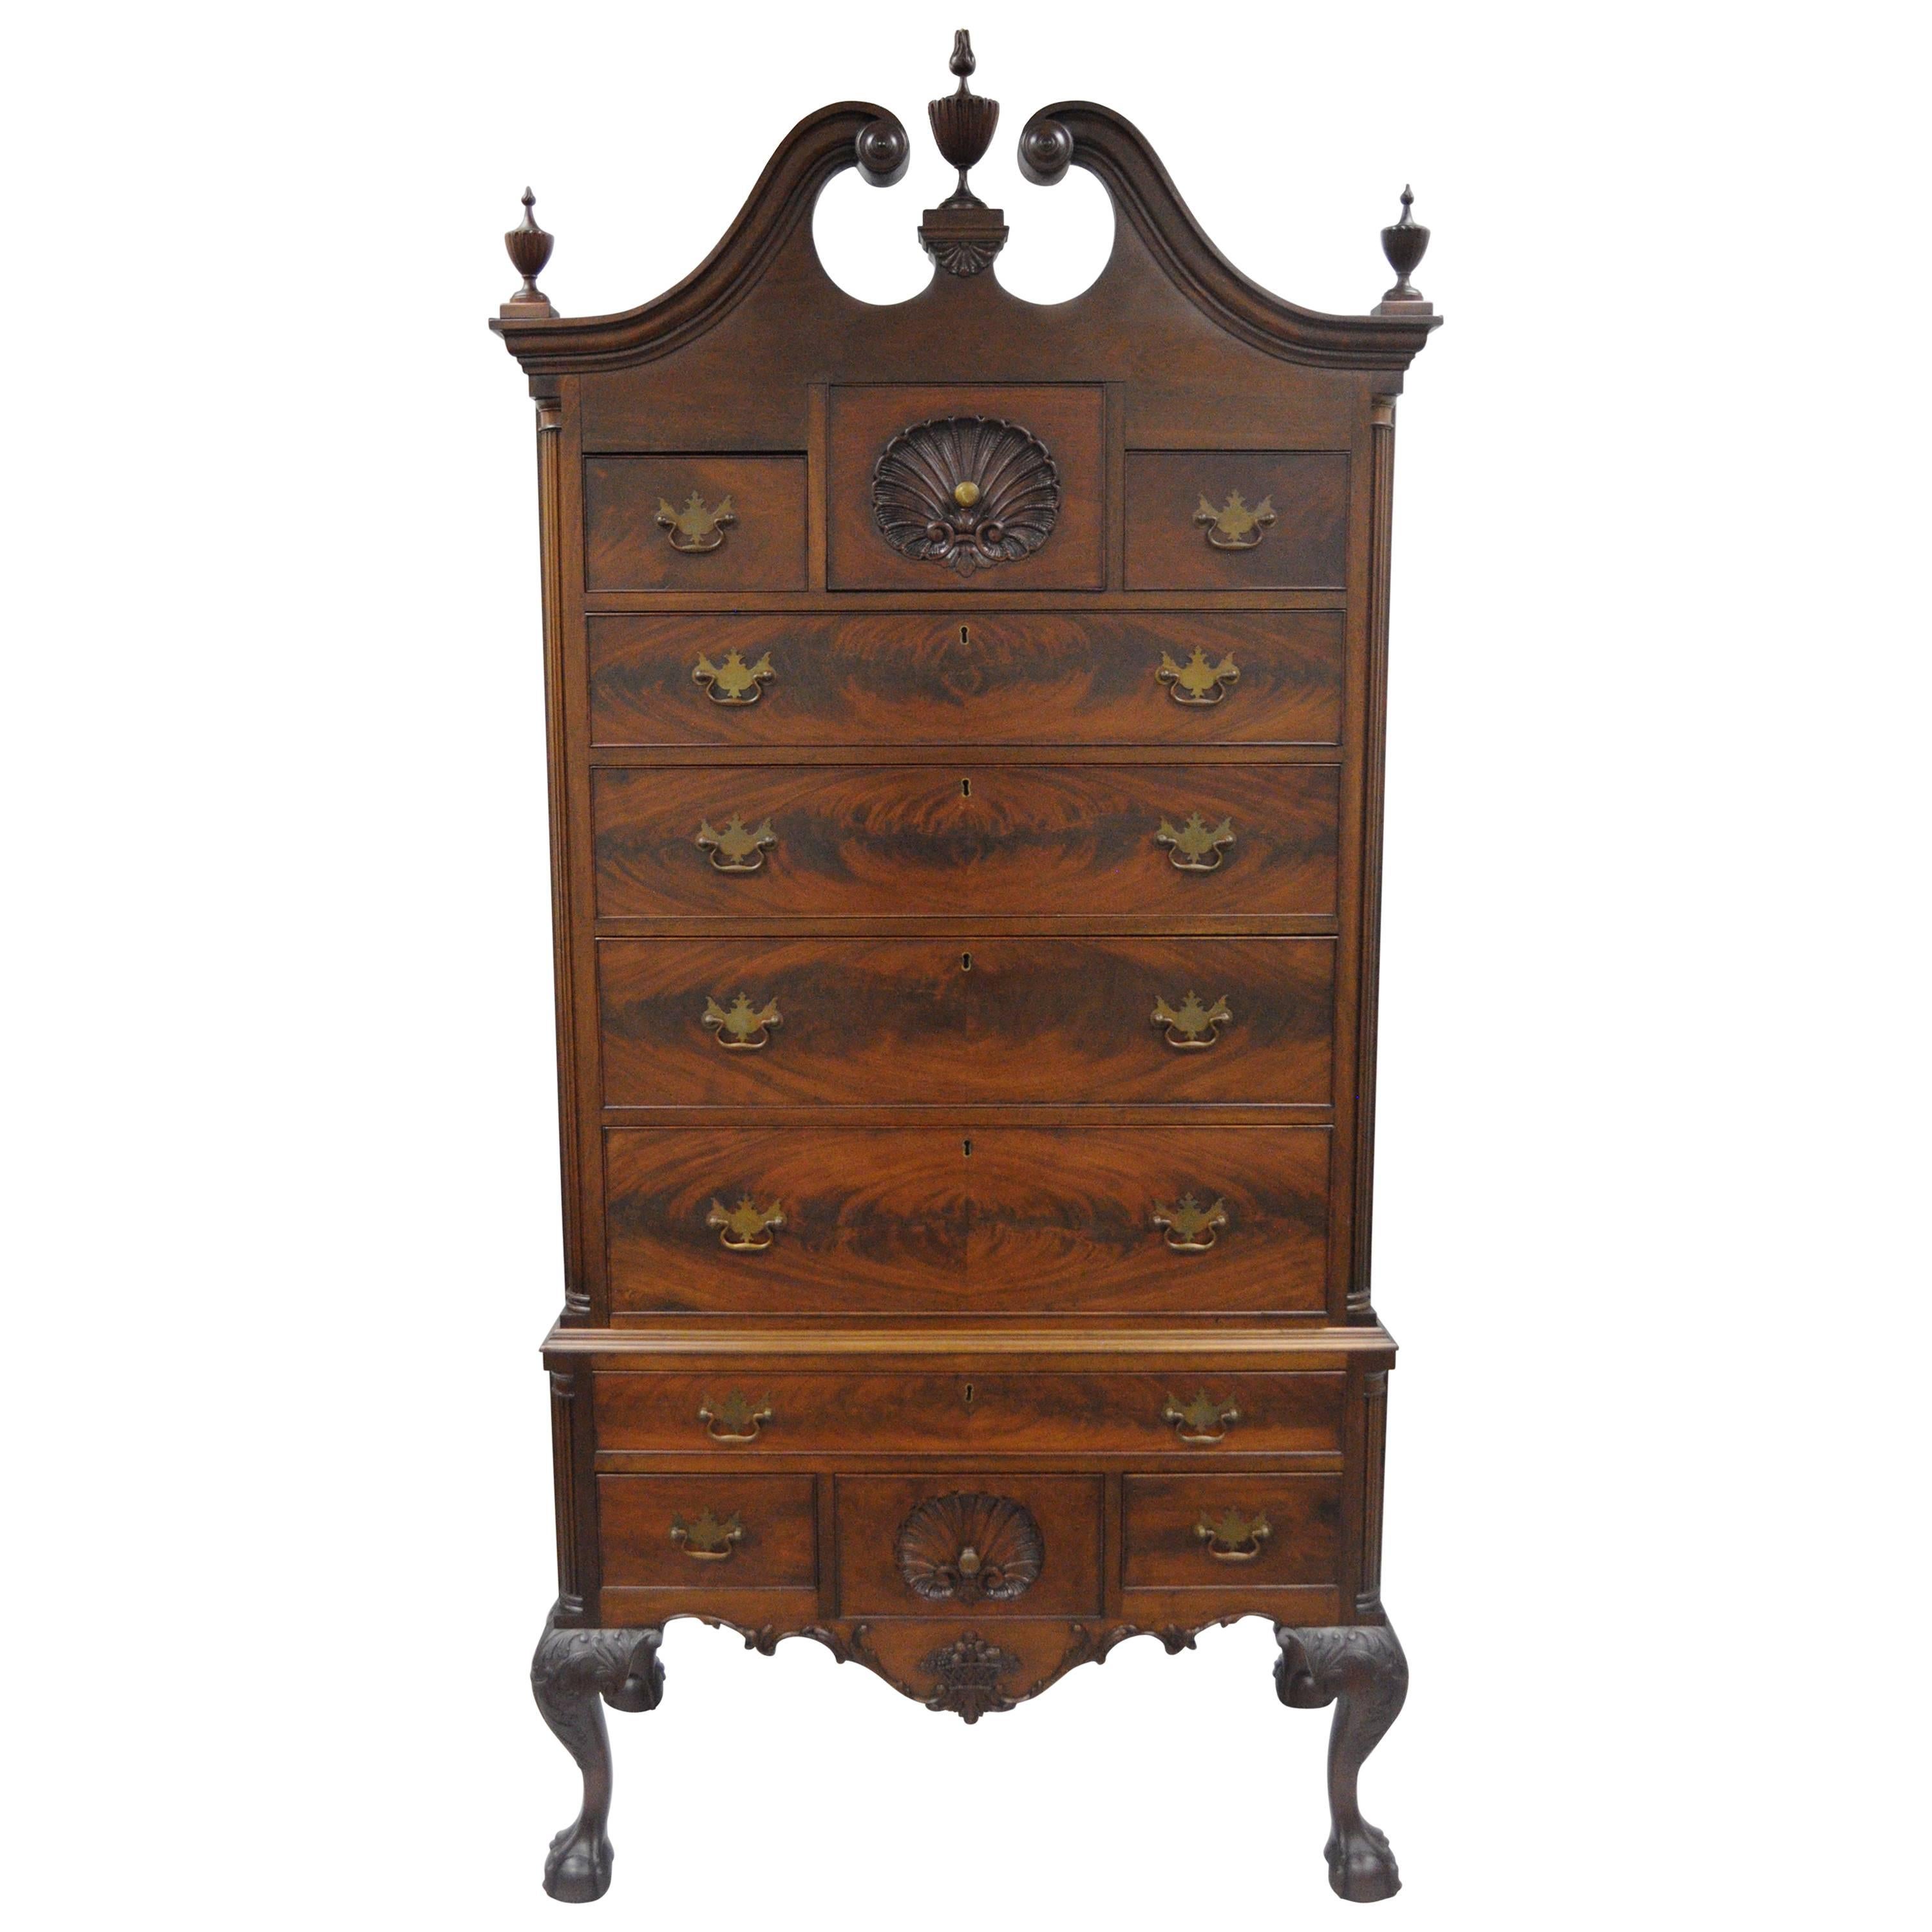 19th C. Crotch Mahogany Chippendale Ball and Claw Highboy Tall Chest of Drawers For Sale